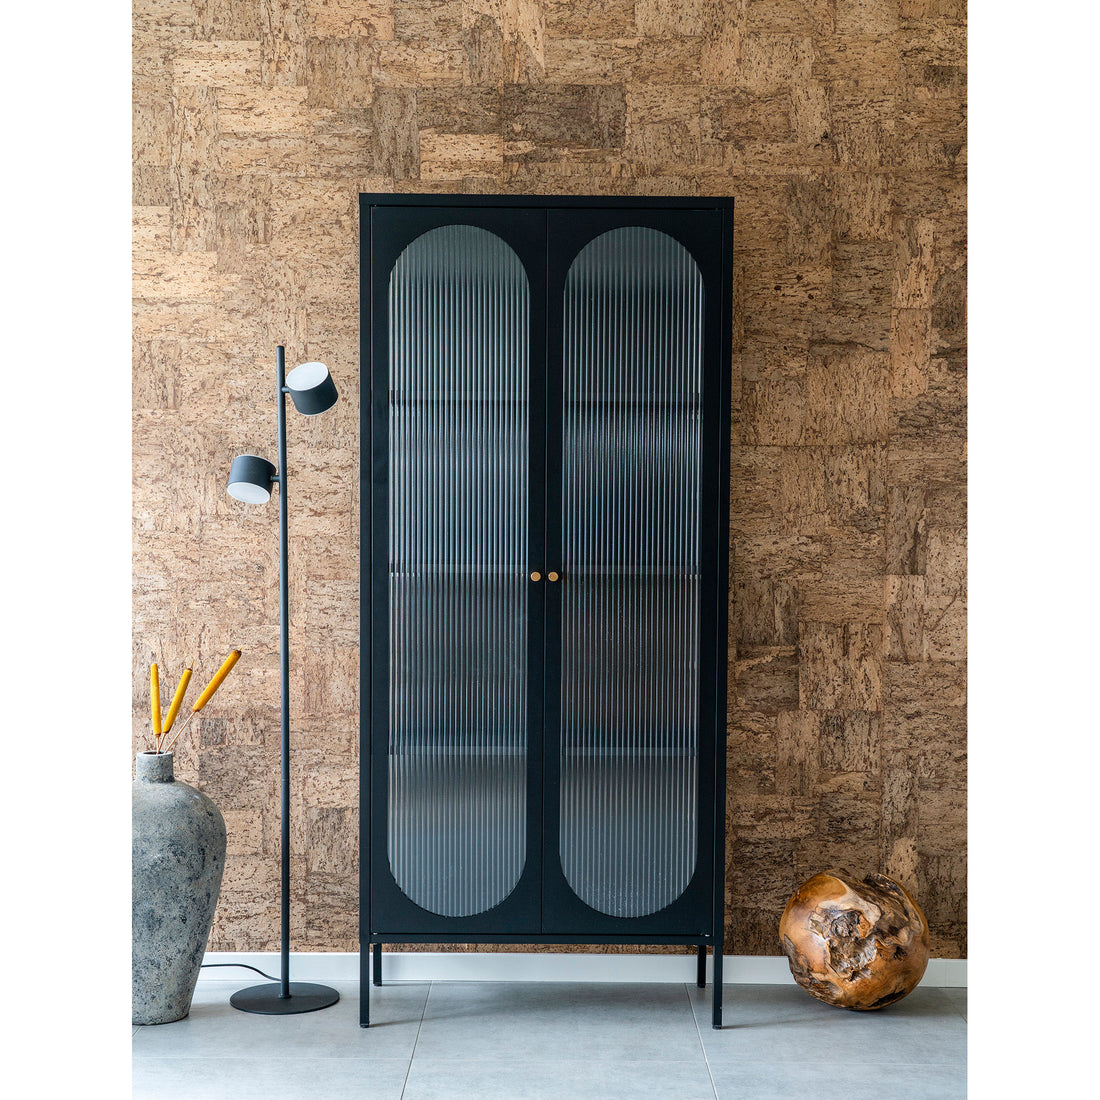 House Nordic - Adelaide - Display cabinet in black with rifled glass door 35x80x180 cm - 1 - pcs